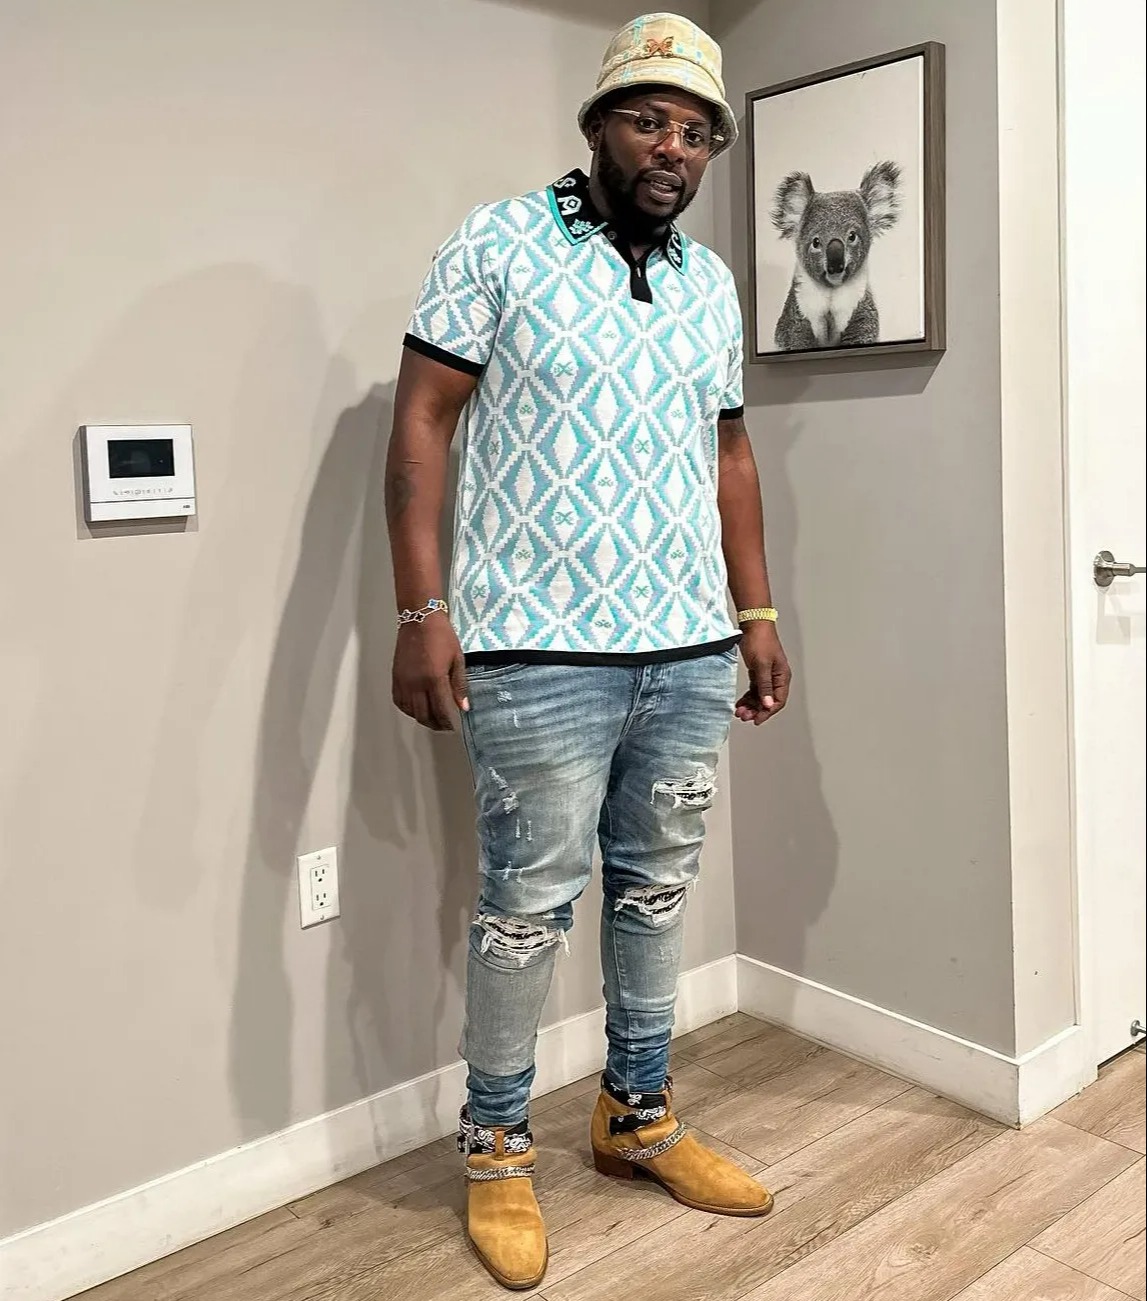 DJ Maphorisa received backlash from fans after posting the video